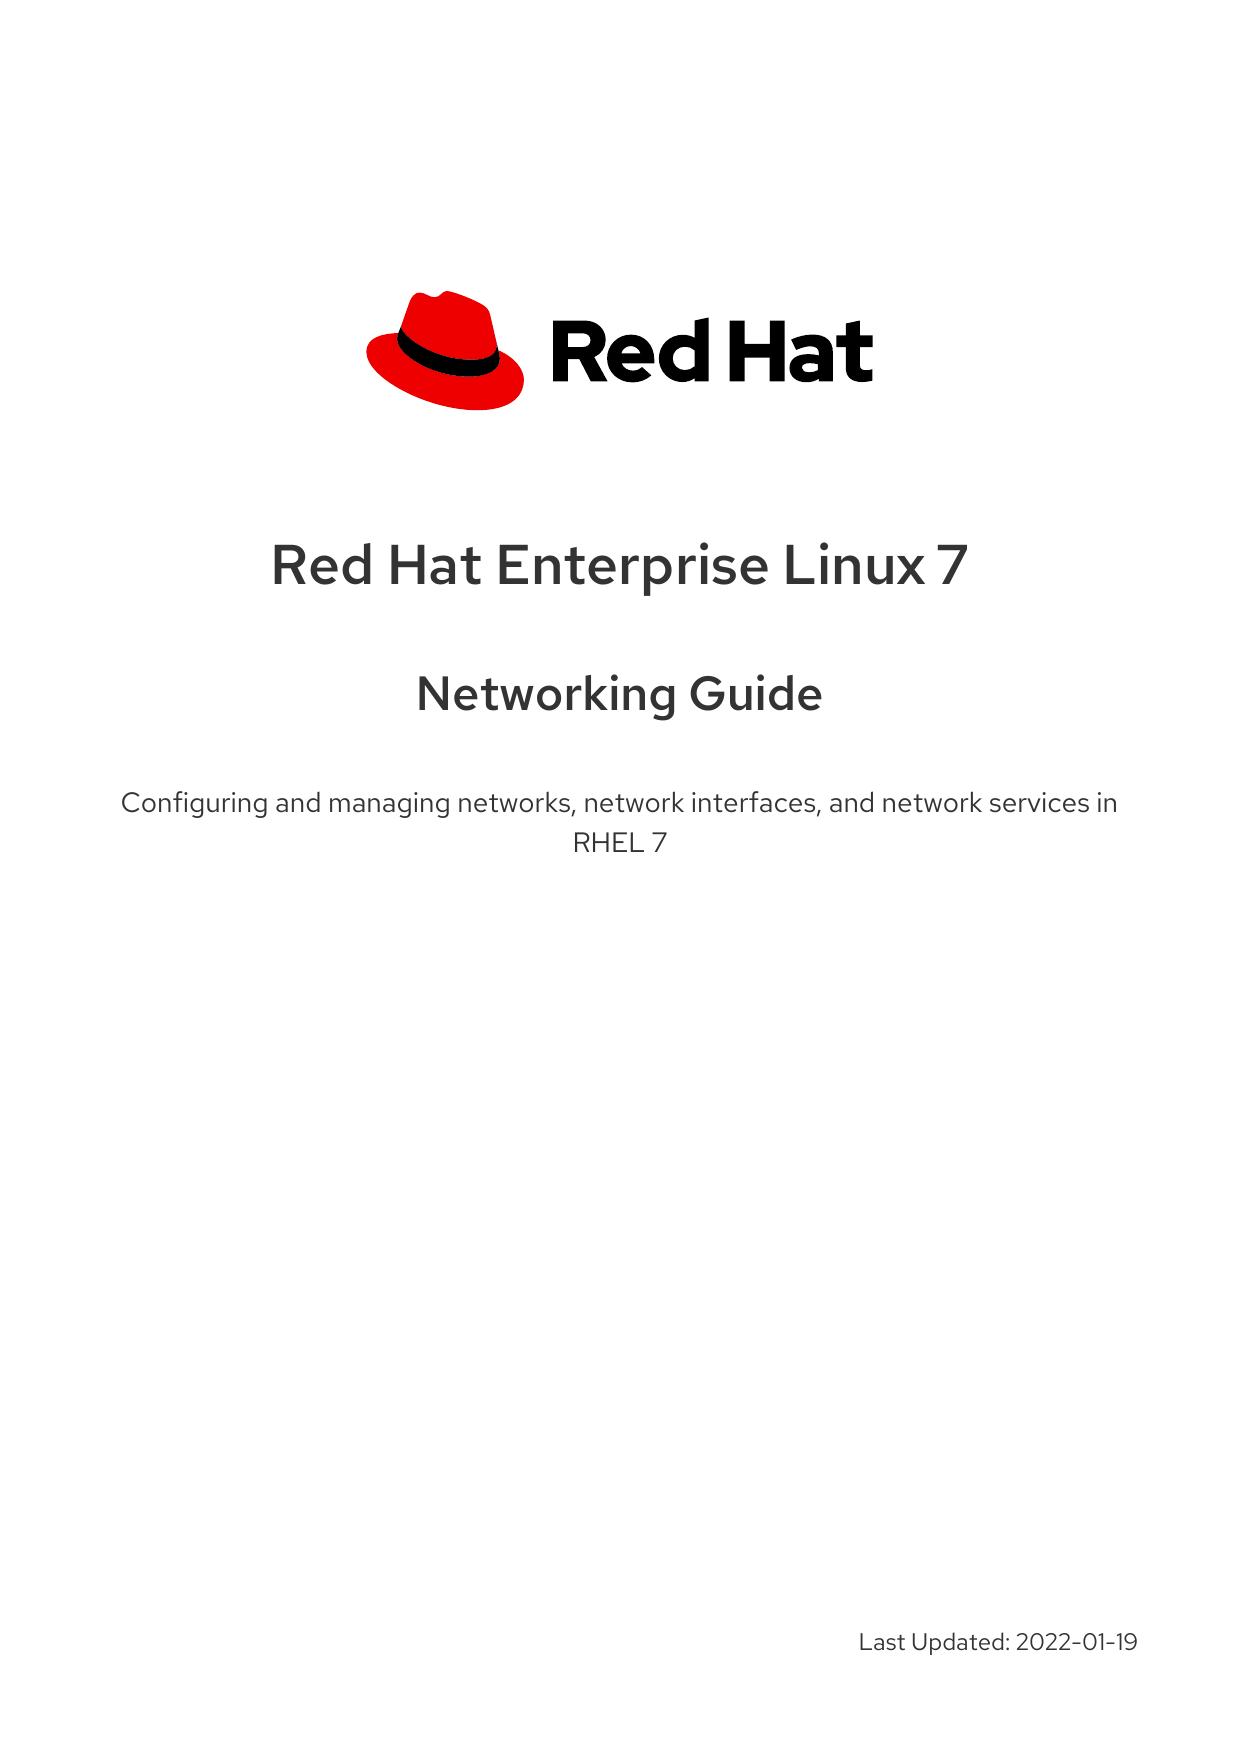 Red Hat Enterprise Linux 7 Networking Guide by Marc Muehlfeld